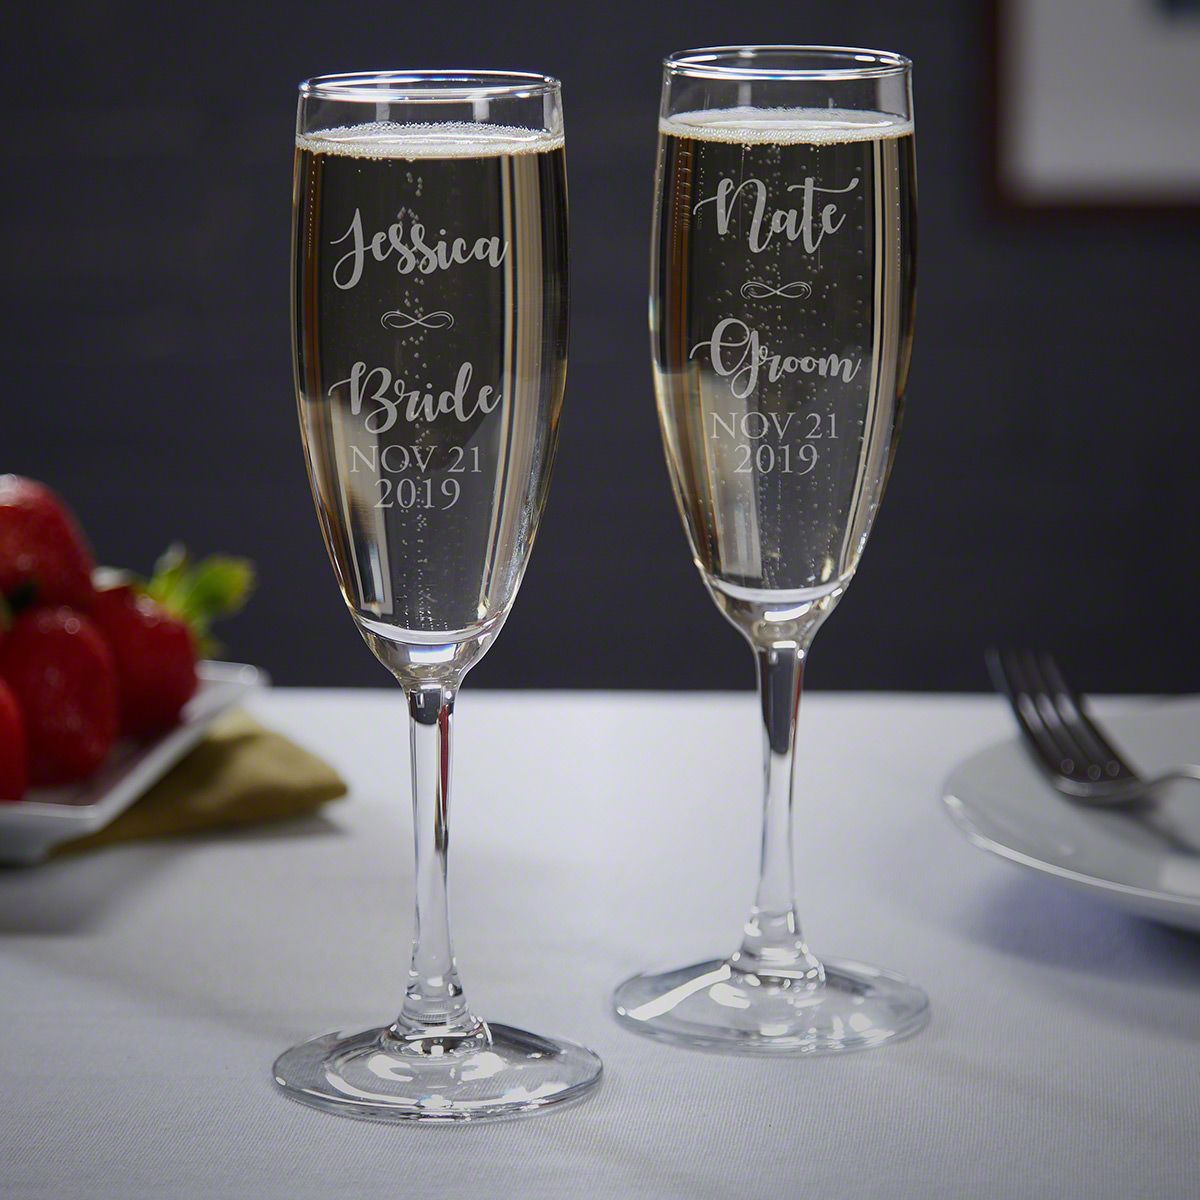 bridesmaid glasses custom champagne flutes bridesmaid gift Personalized champagne flutes bridal party stemless champagne flutes